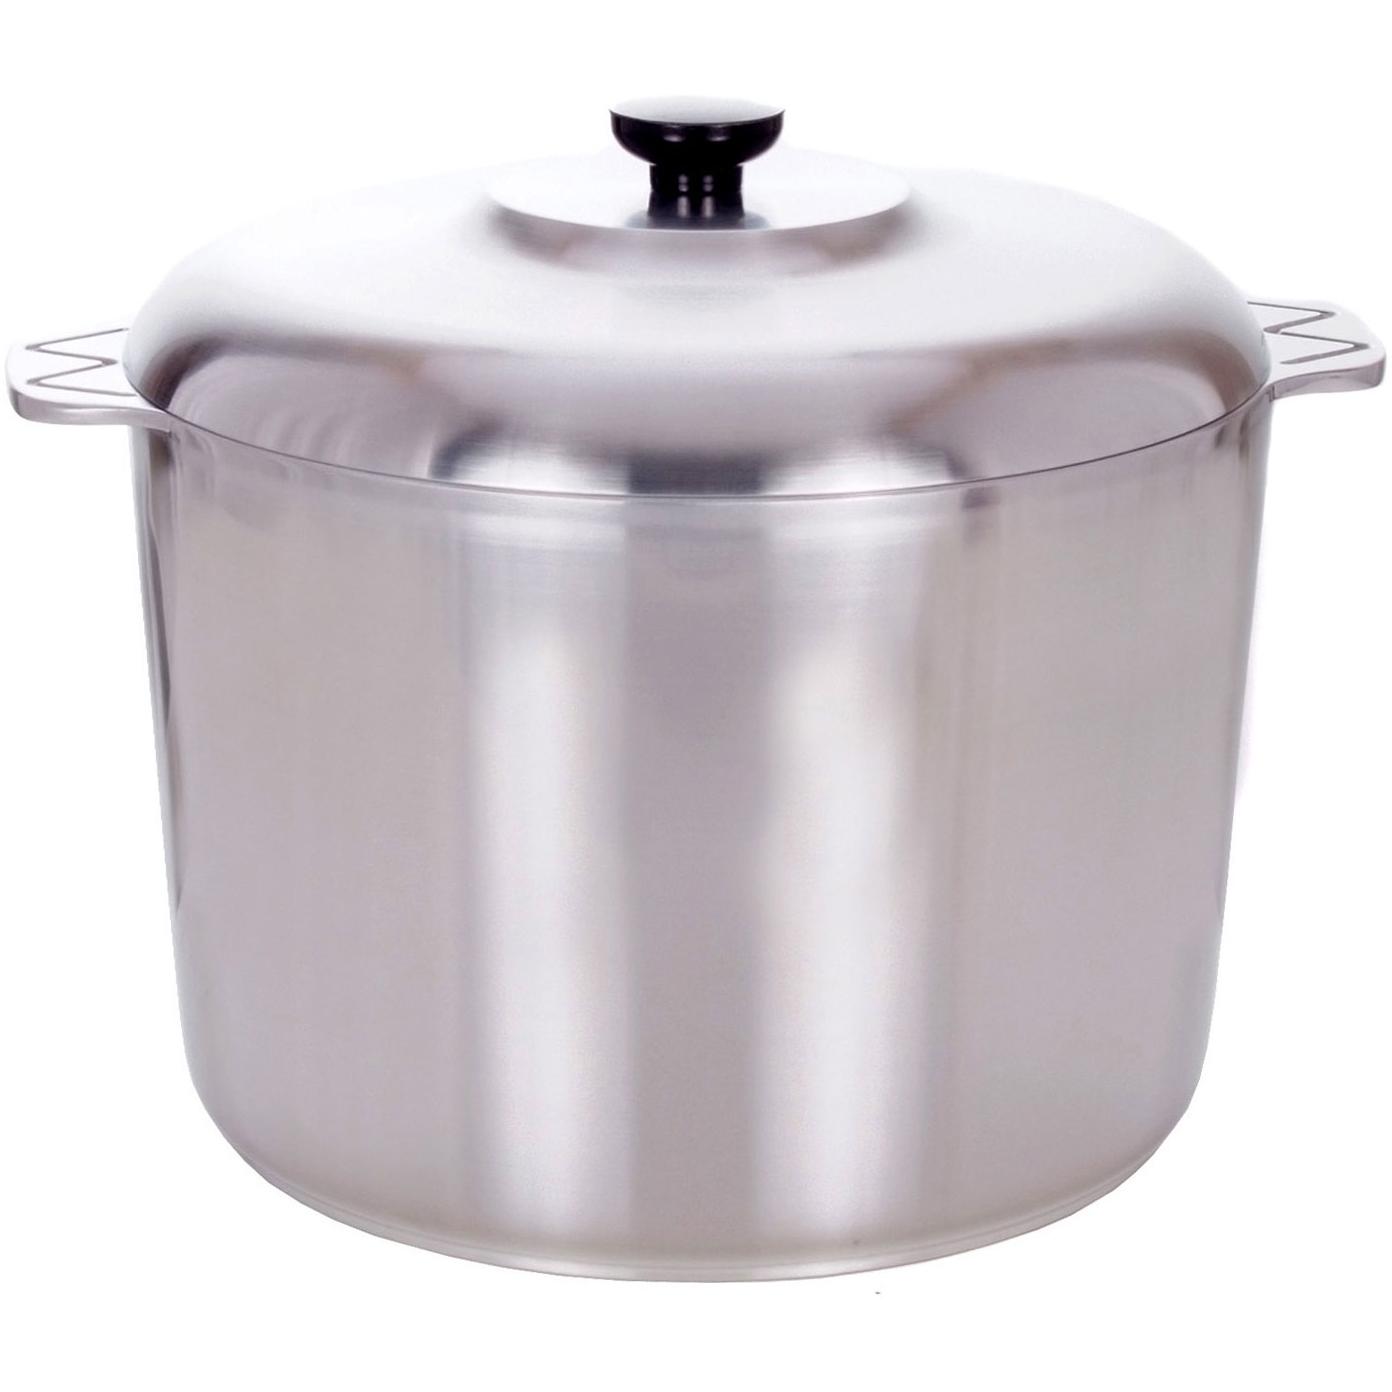 McWare Sauce Pot w/ cool blue handle - 5 Sizes Available ·